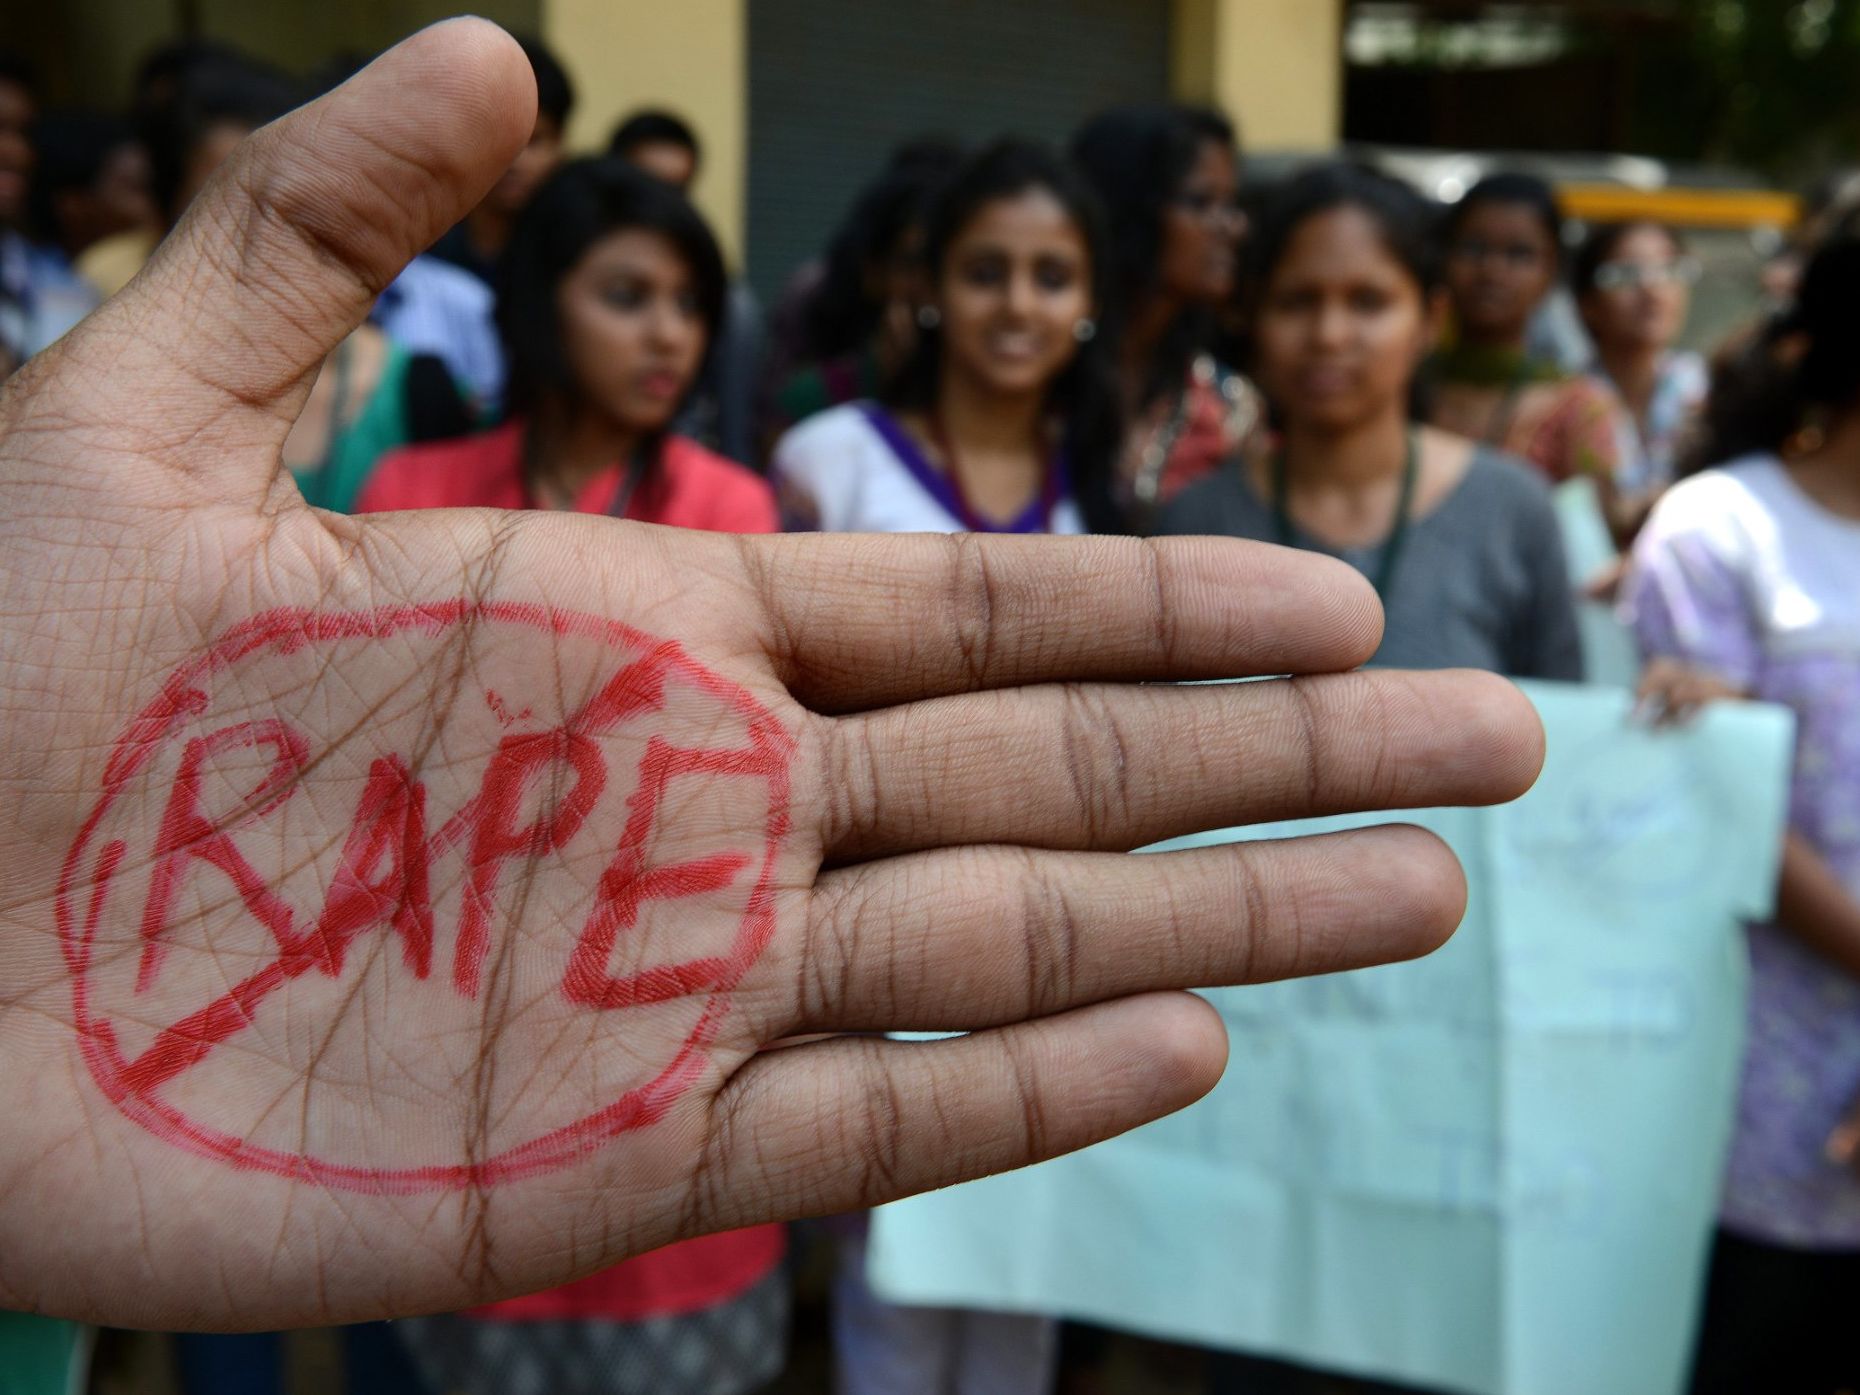 Rep Girl Boy Xxx - Despite reforms, sexual assault survivors face systemic barriers in India |  CNN